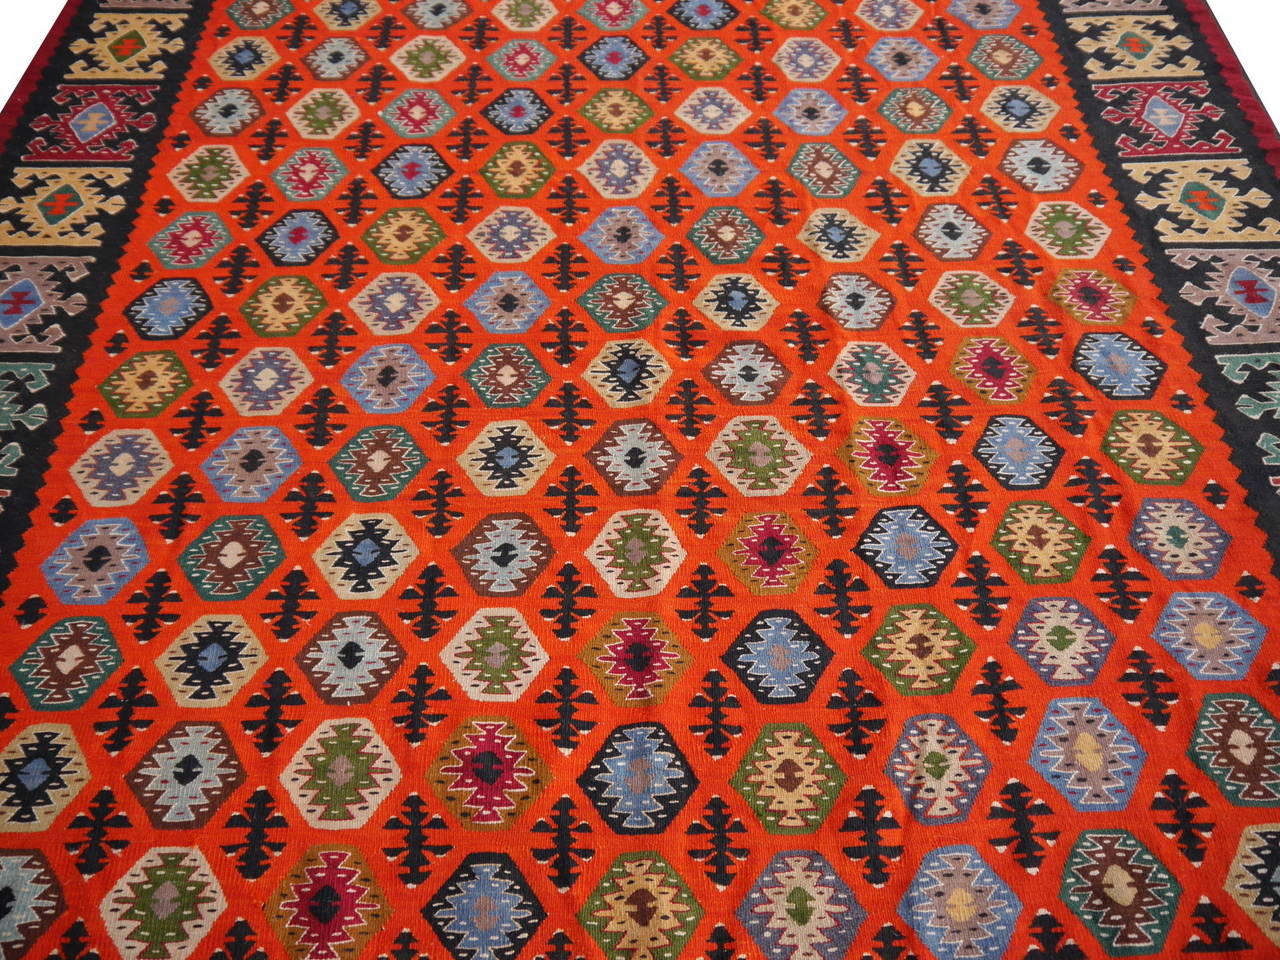 Very fine and unusual Turkish Kilim with beautiful colors. All original and in perfect collectors condition.